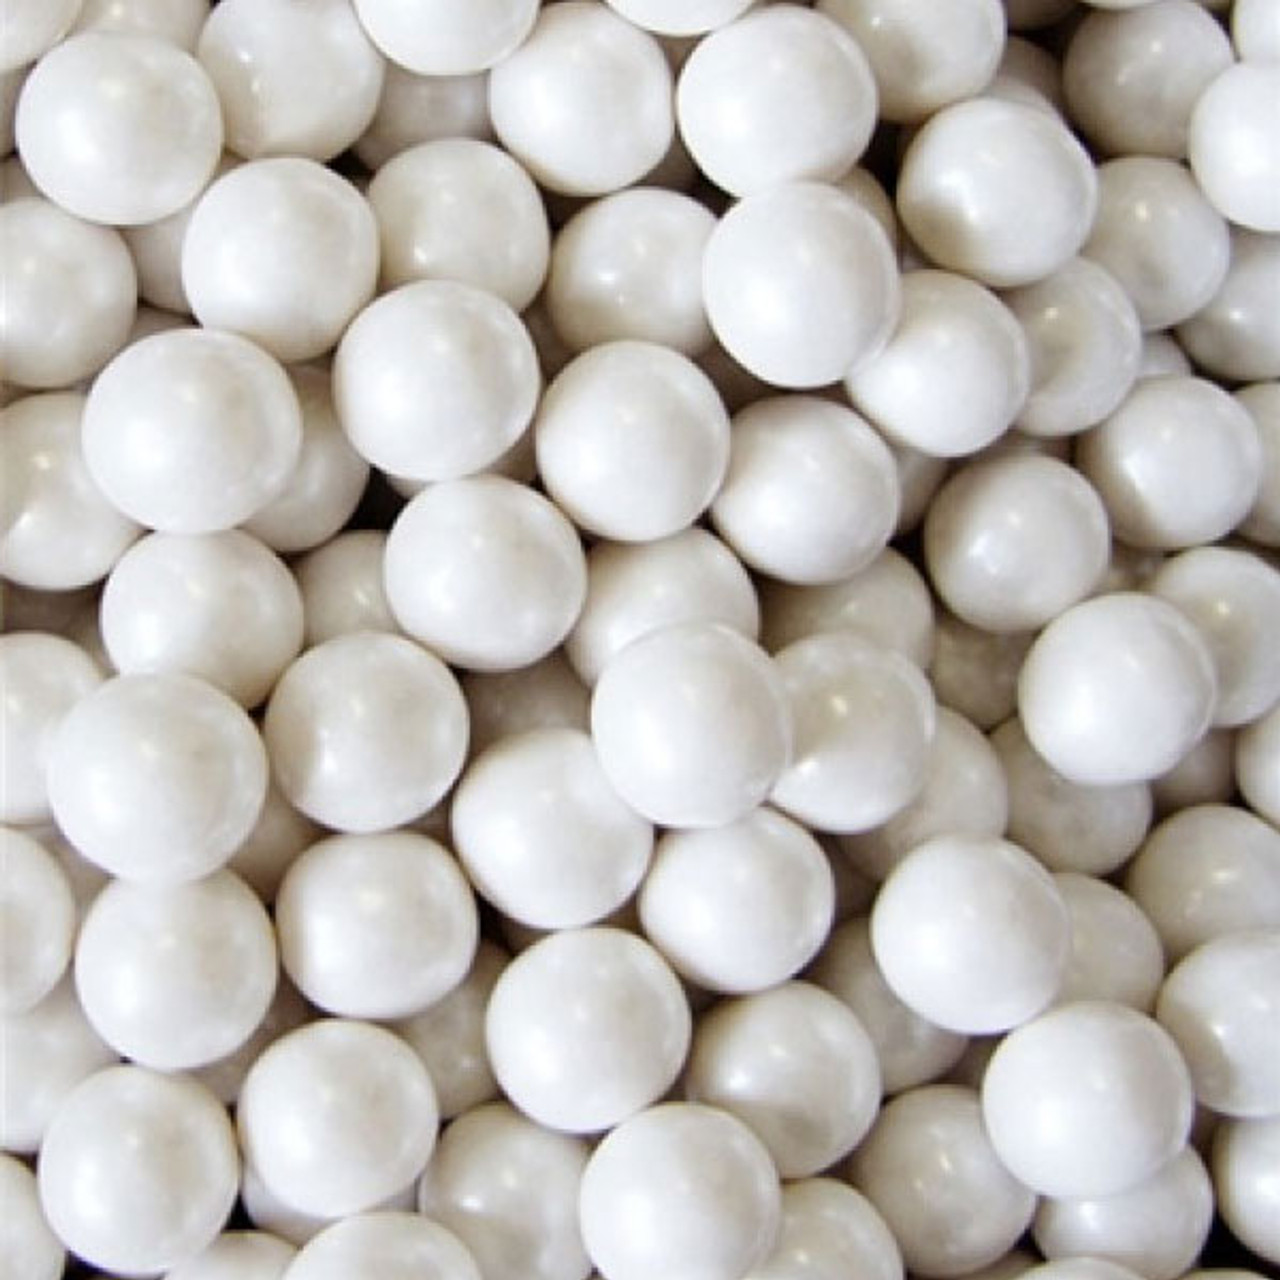 Small White Gumballs for Weddings and Parties